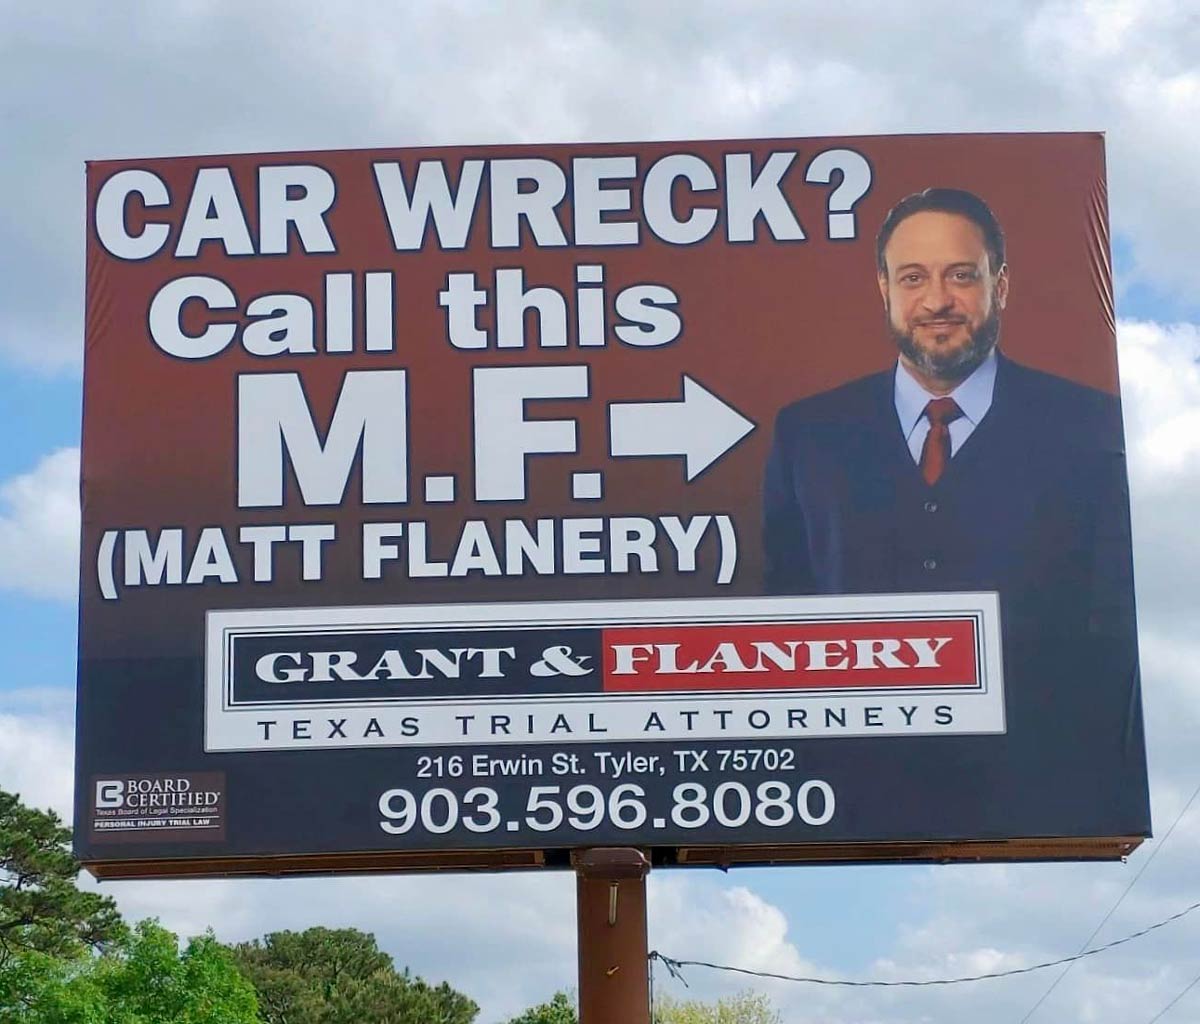 billboard - Car Wreck? Call this M.F.> Matt Flanery Board Certified Texas Board of Legal Specialization Personal Injury Trial Law Grant & Flanery Texas Trial Attorneys 216 Erwin St. Tyler, Tx 75702 903.596.8080